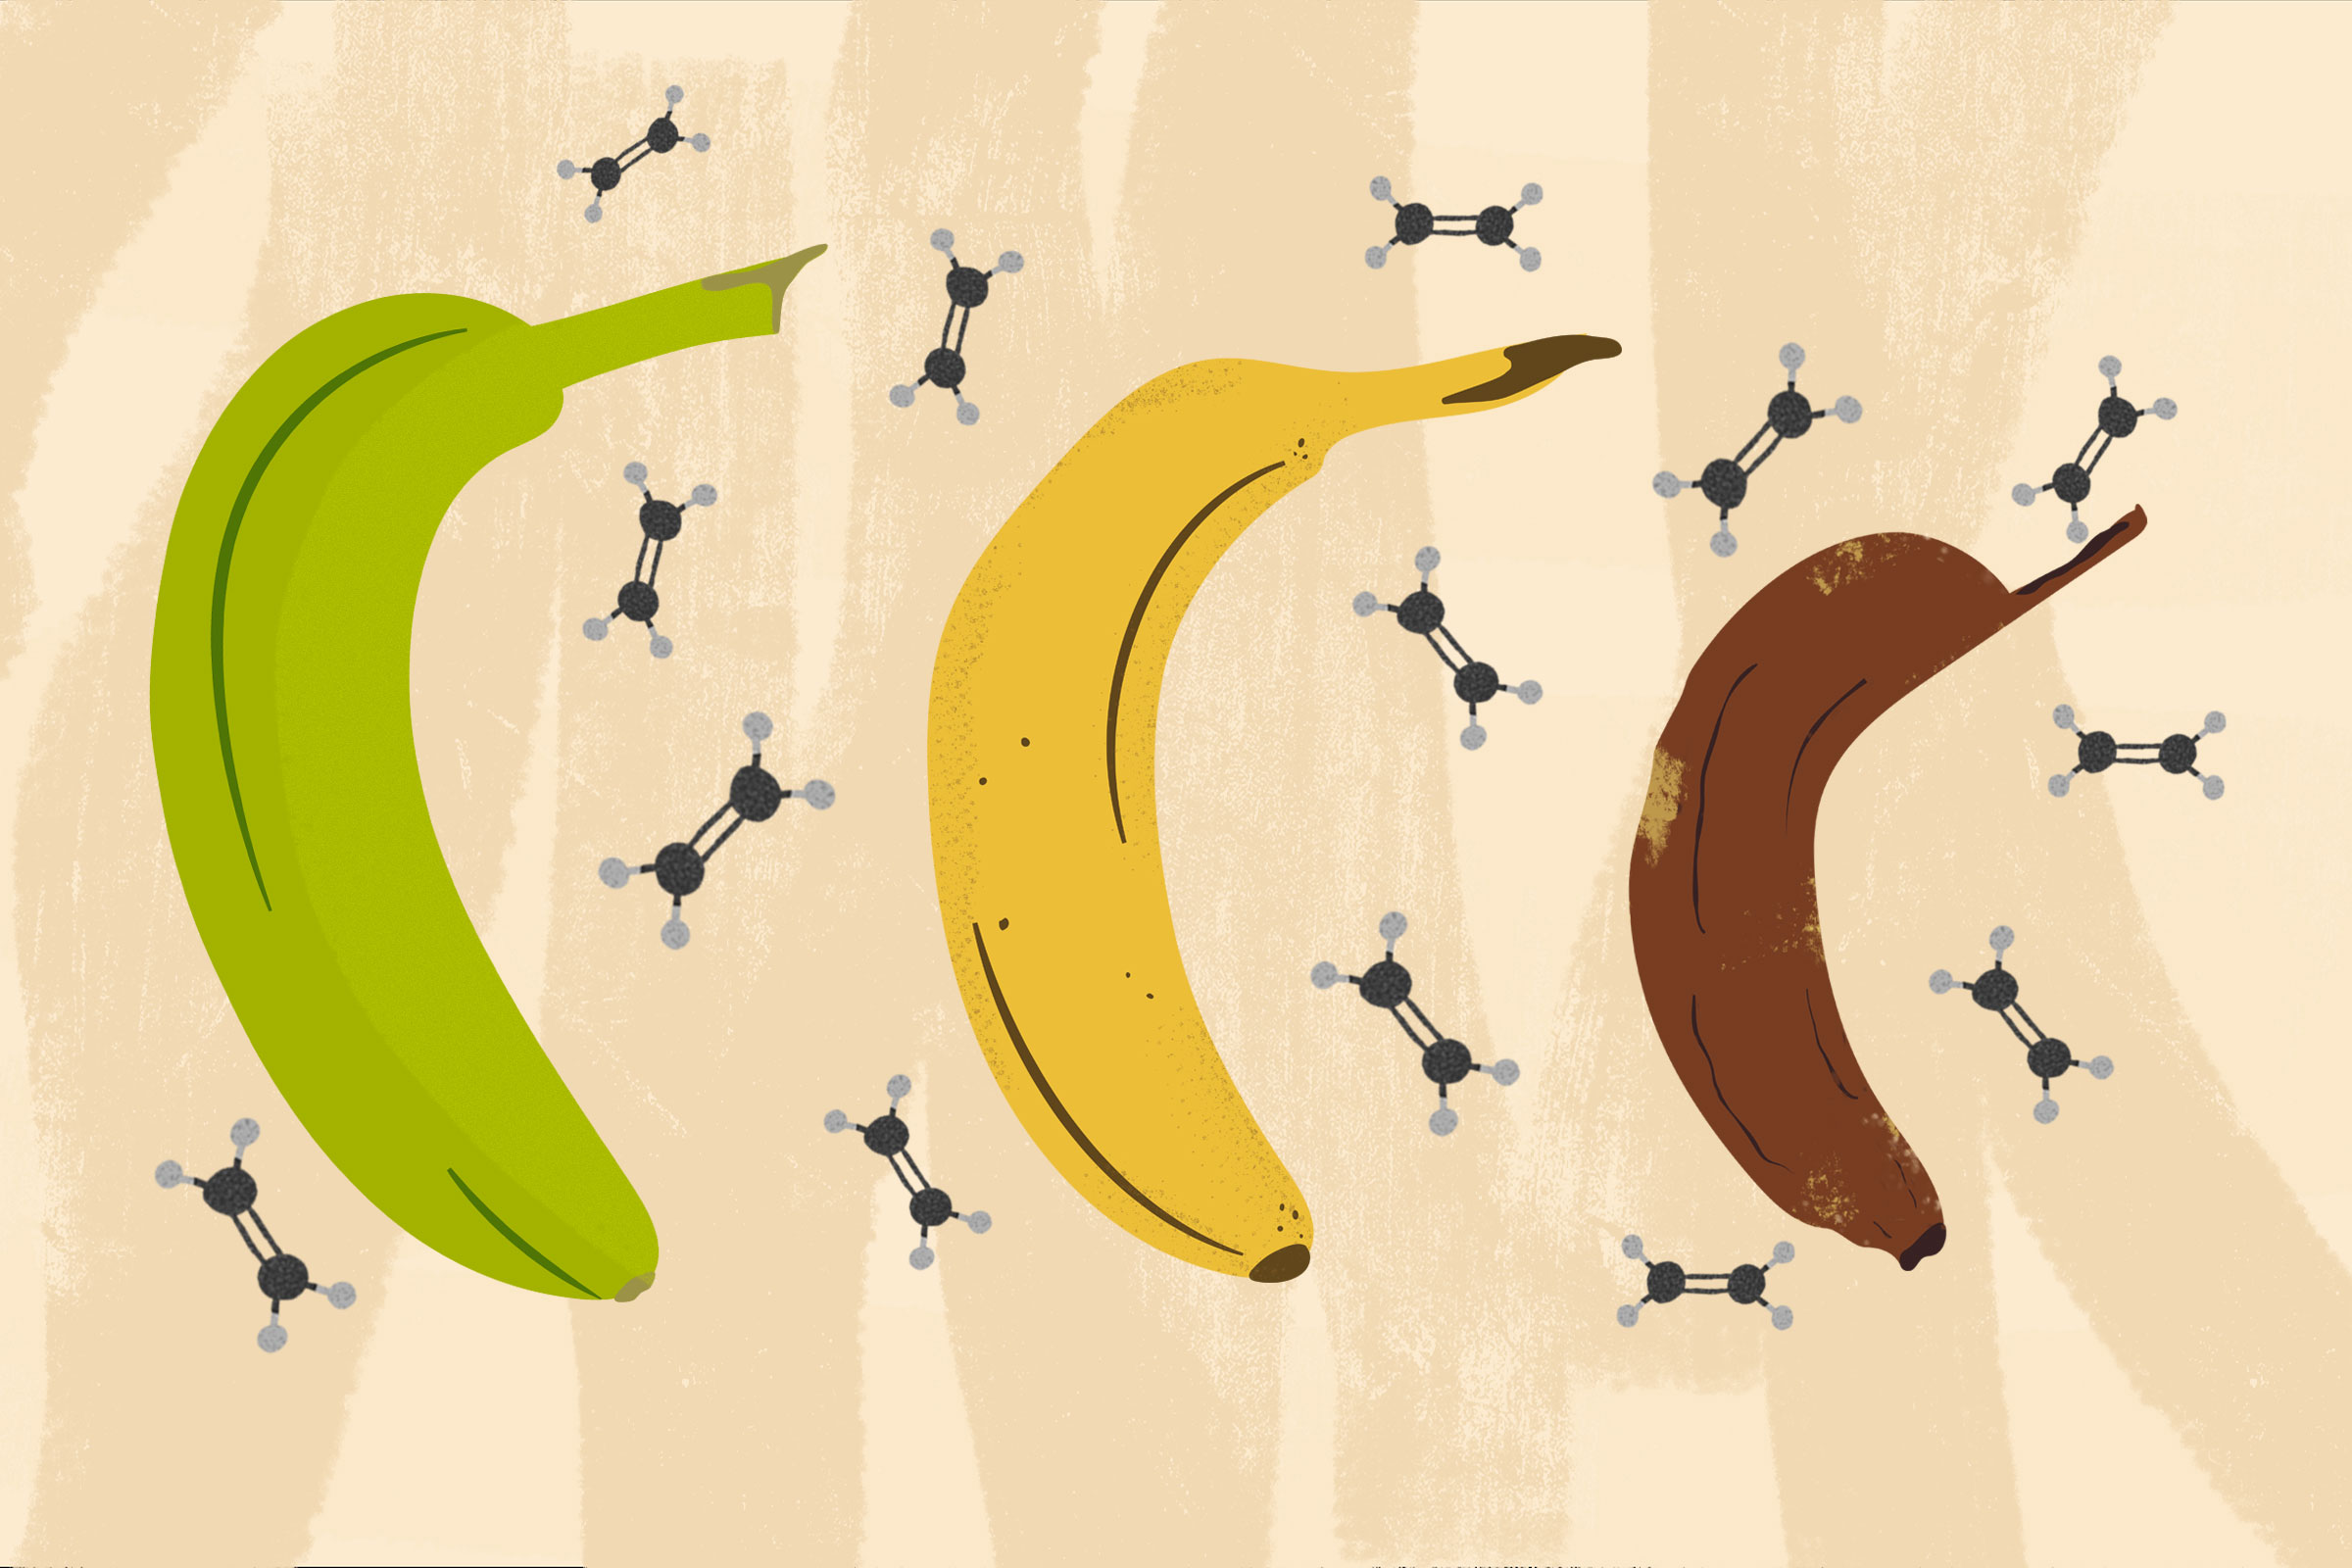 The ethylene from bananas stored together can even cause each other to ripen faster.